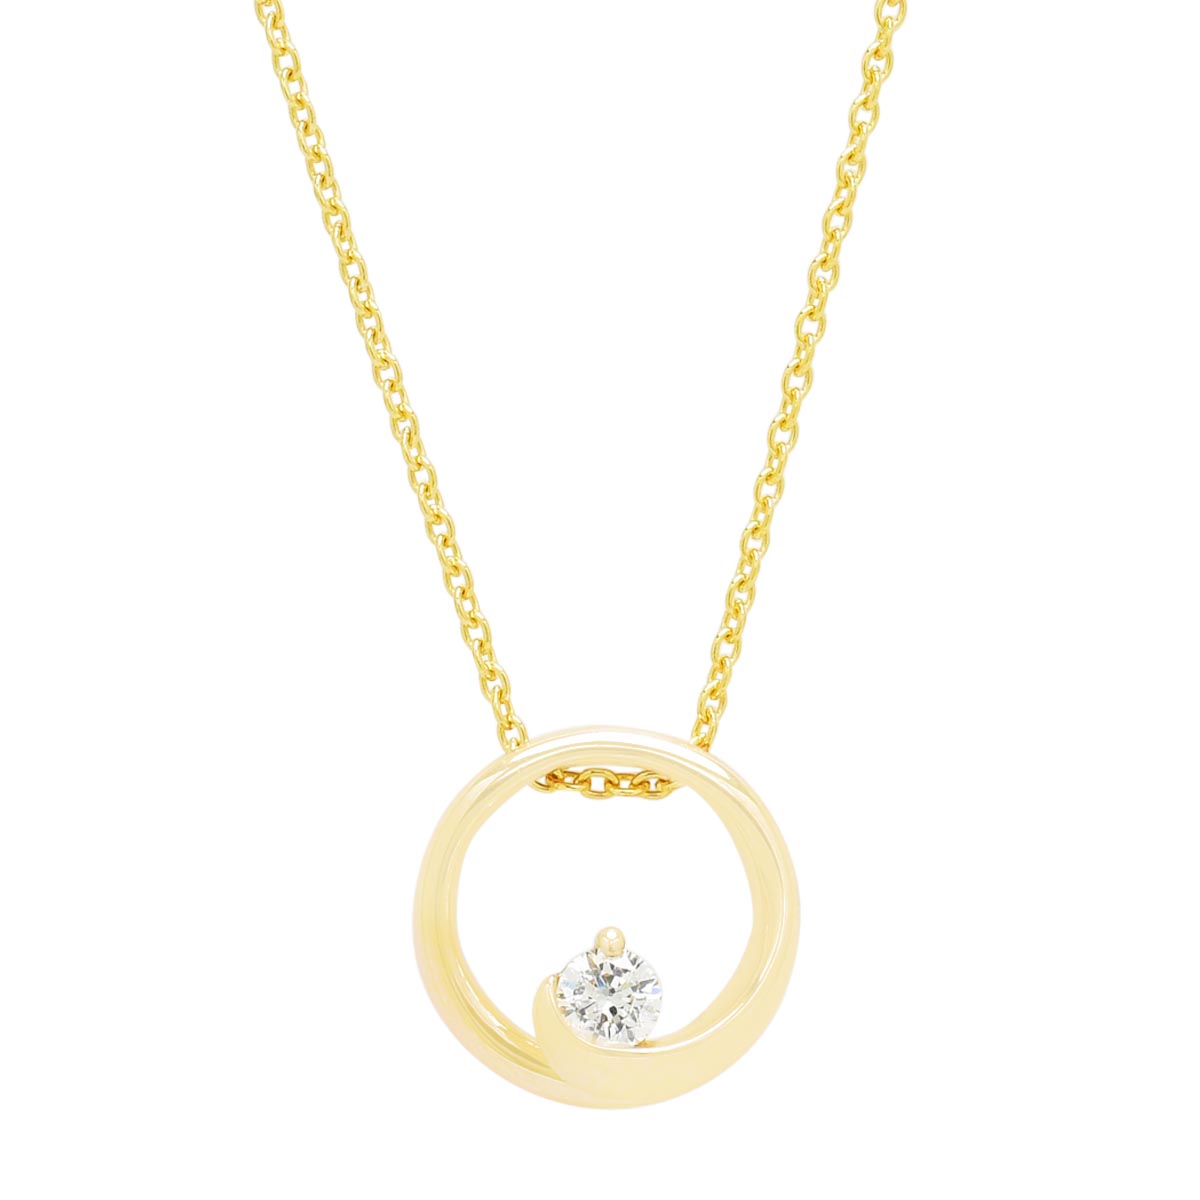 Northern Star Diamond Celestial Collection Necklace in 10kt Yellow Gold (1/10ct)